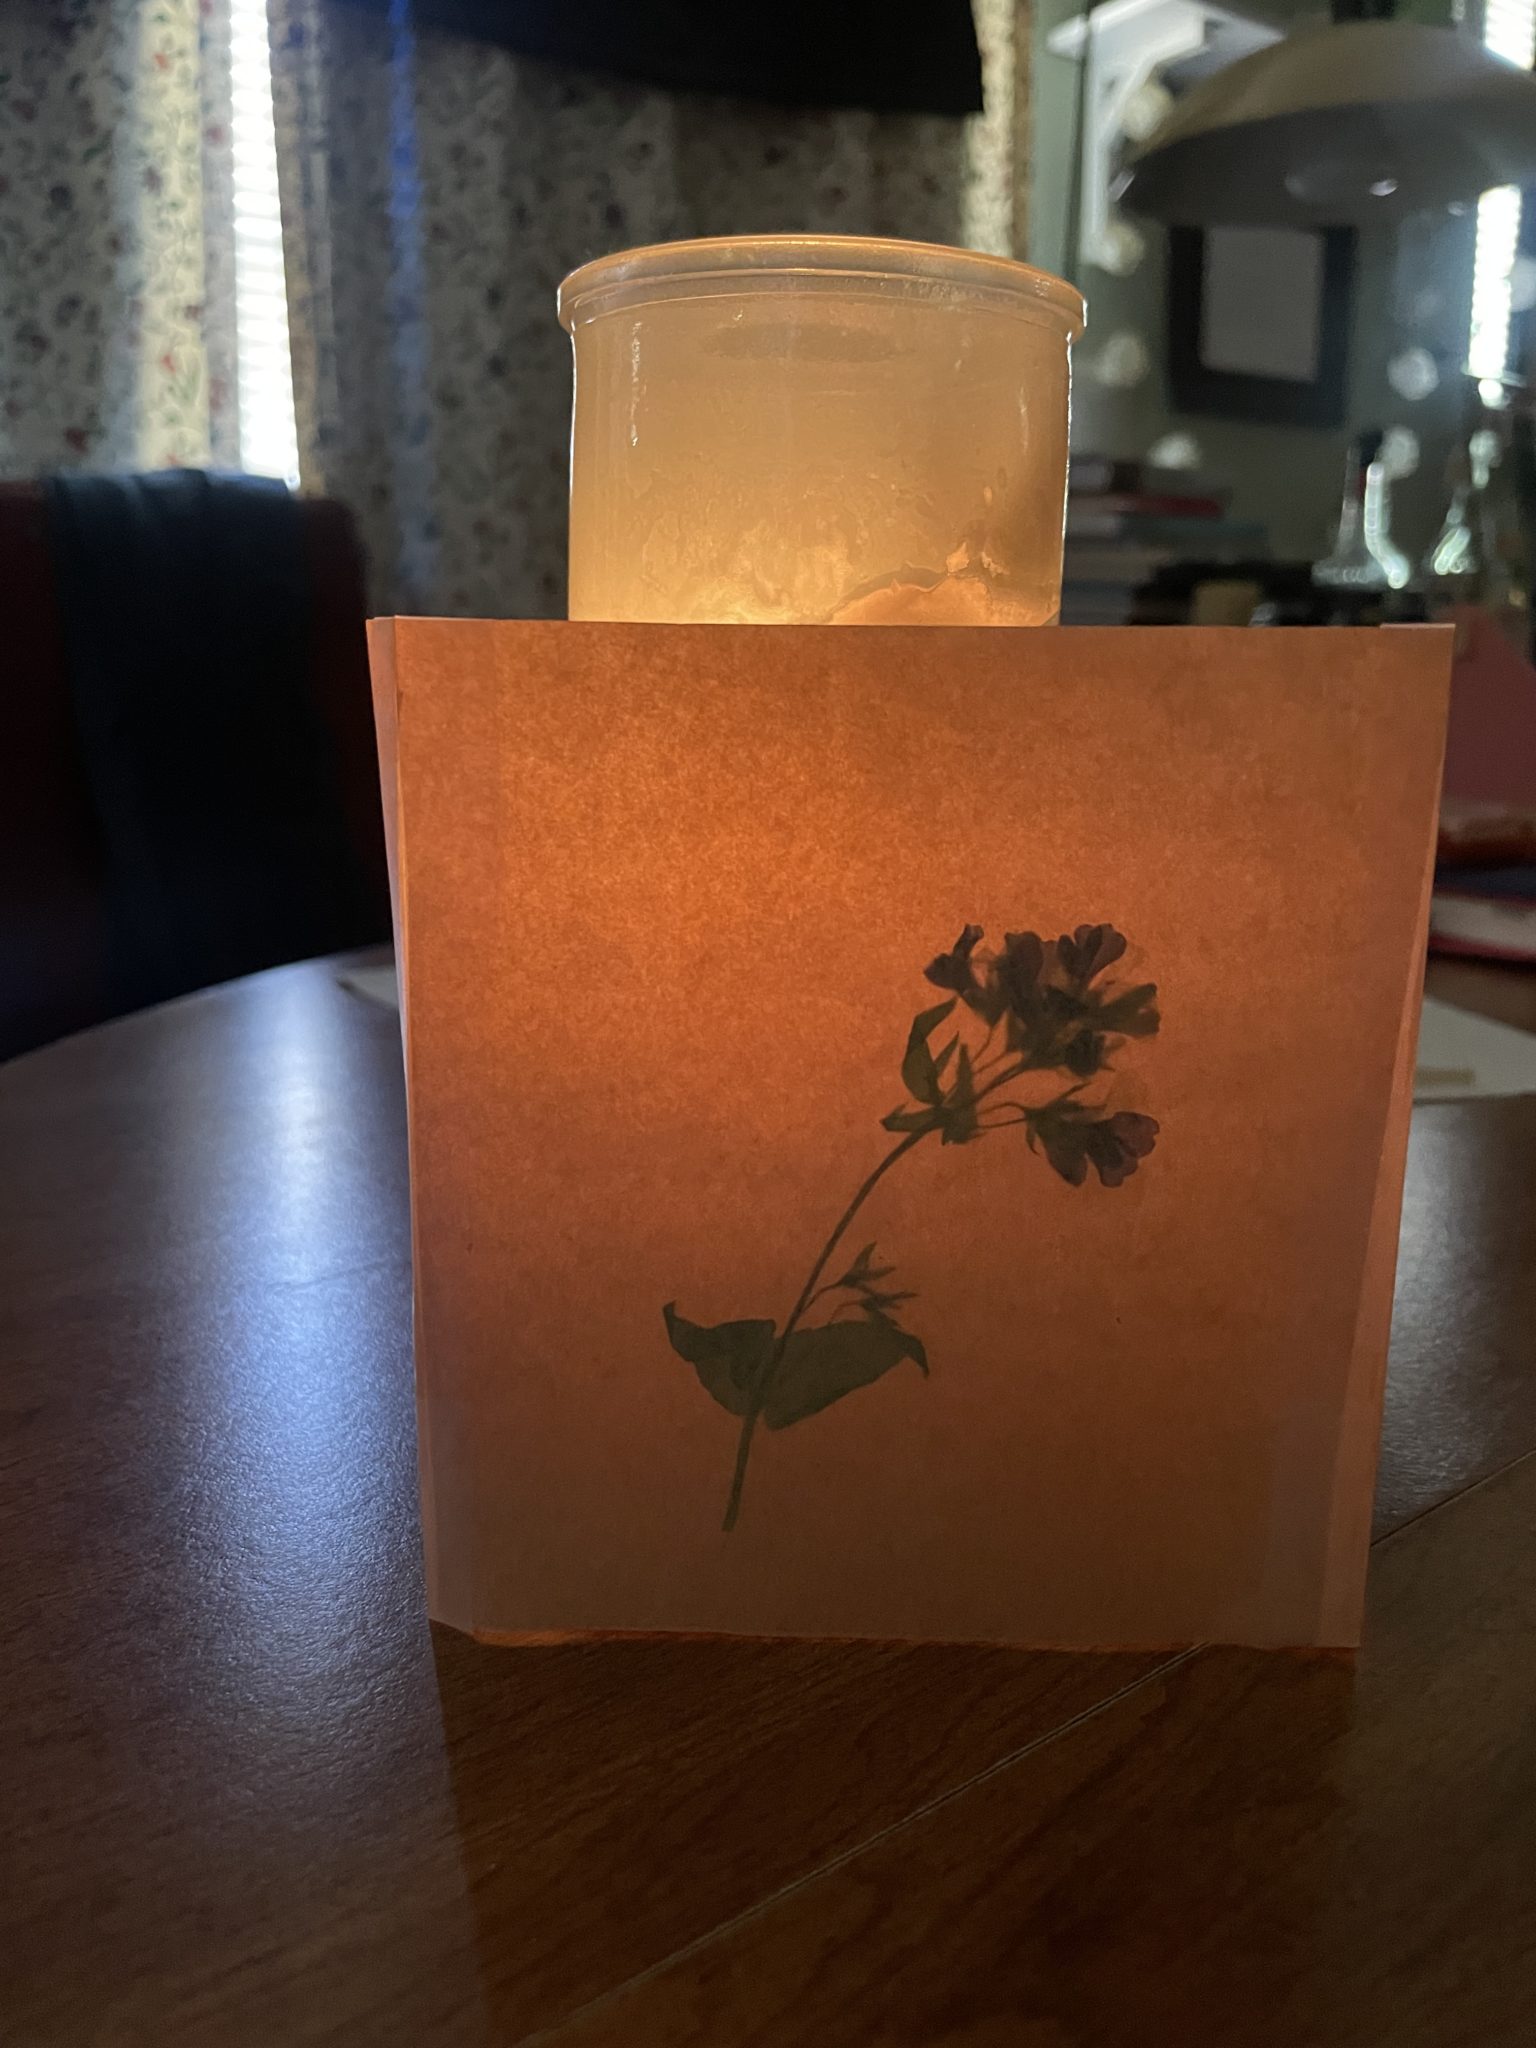 A tall, thin candle glows inside a luminaria or candle shade made of waxed paper and a pressed Blue-Eyed Mary bloom, an early spring wildflower.